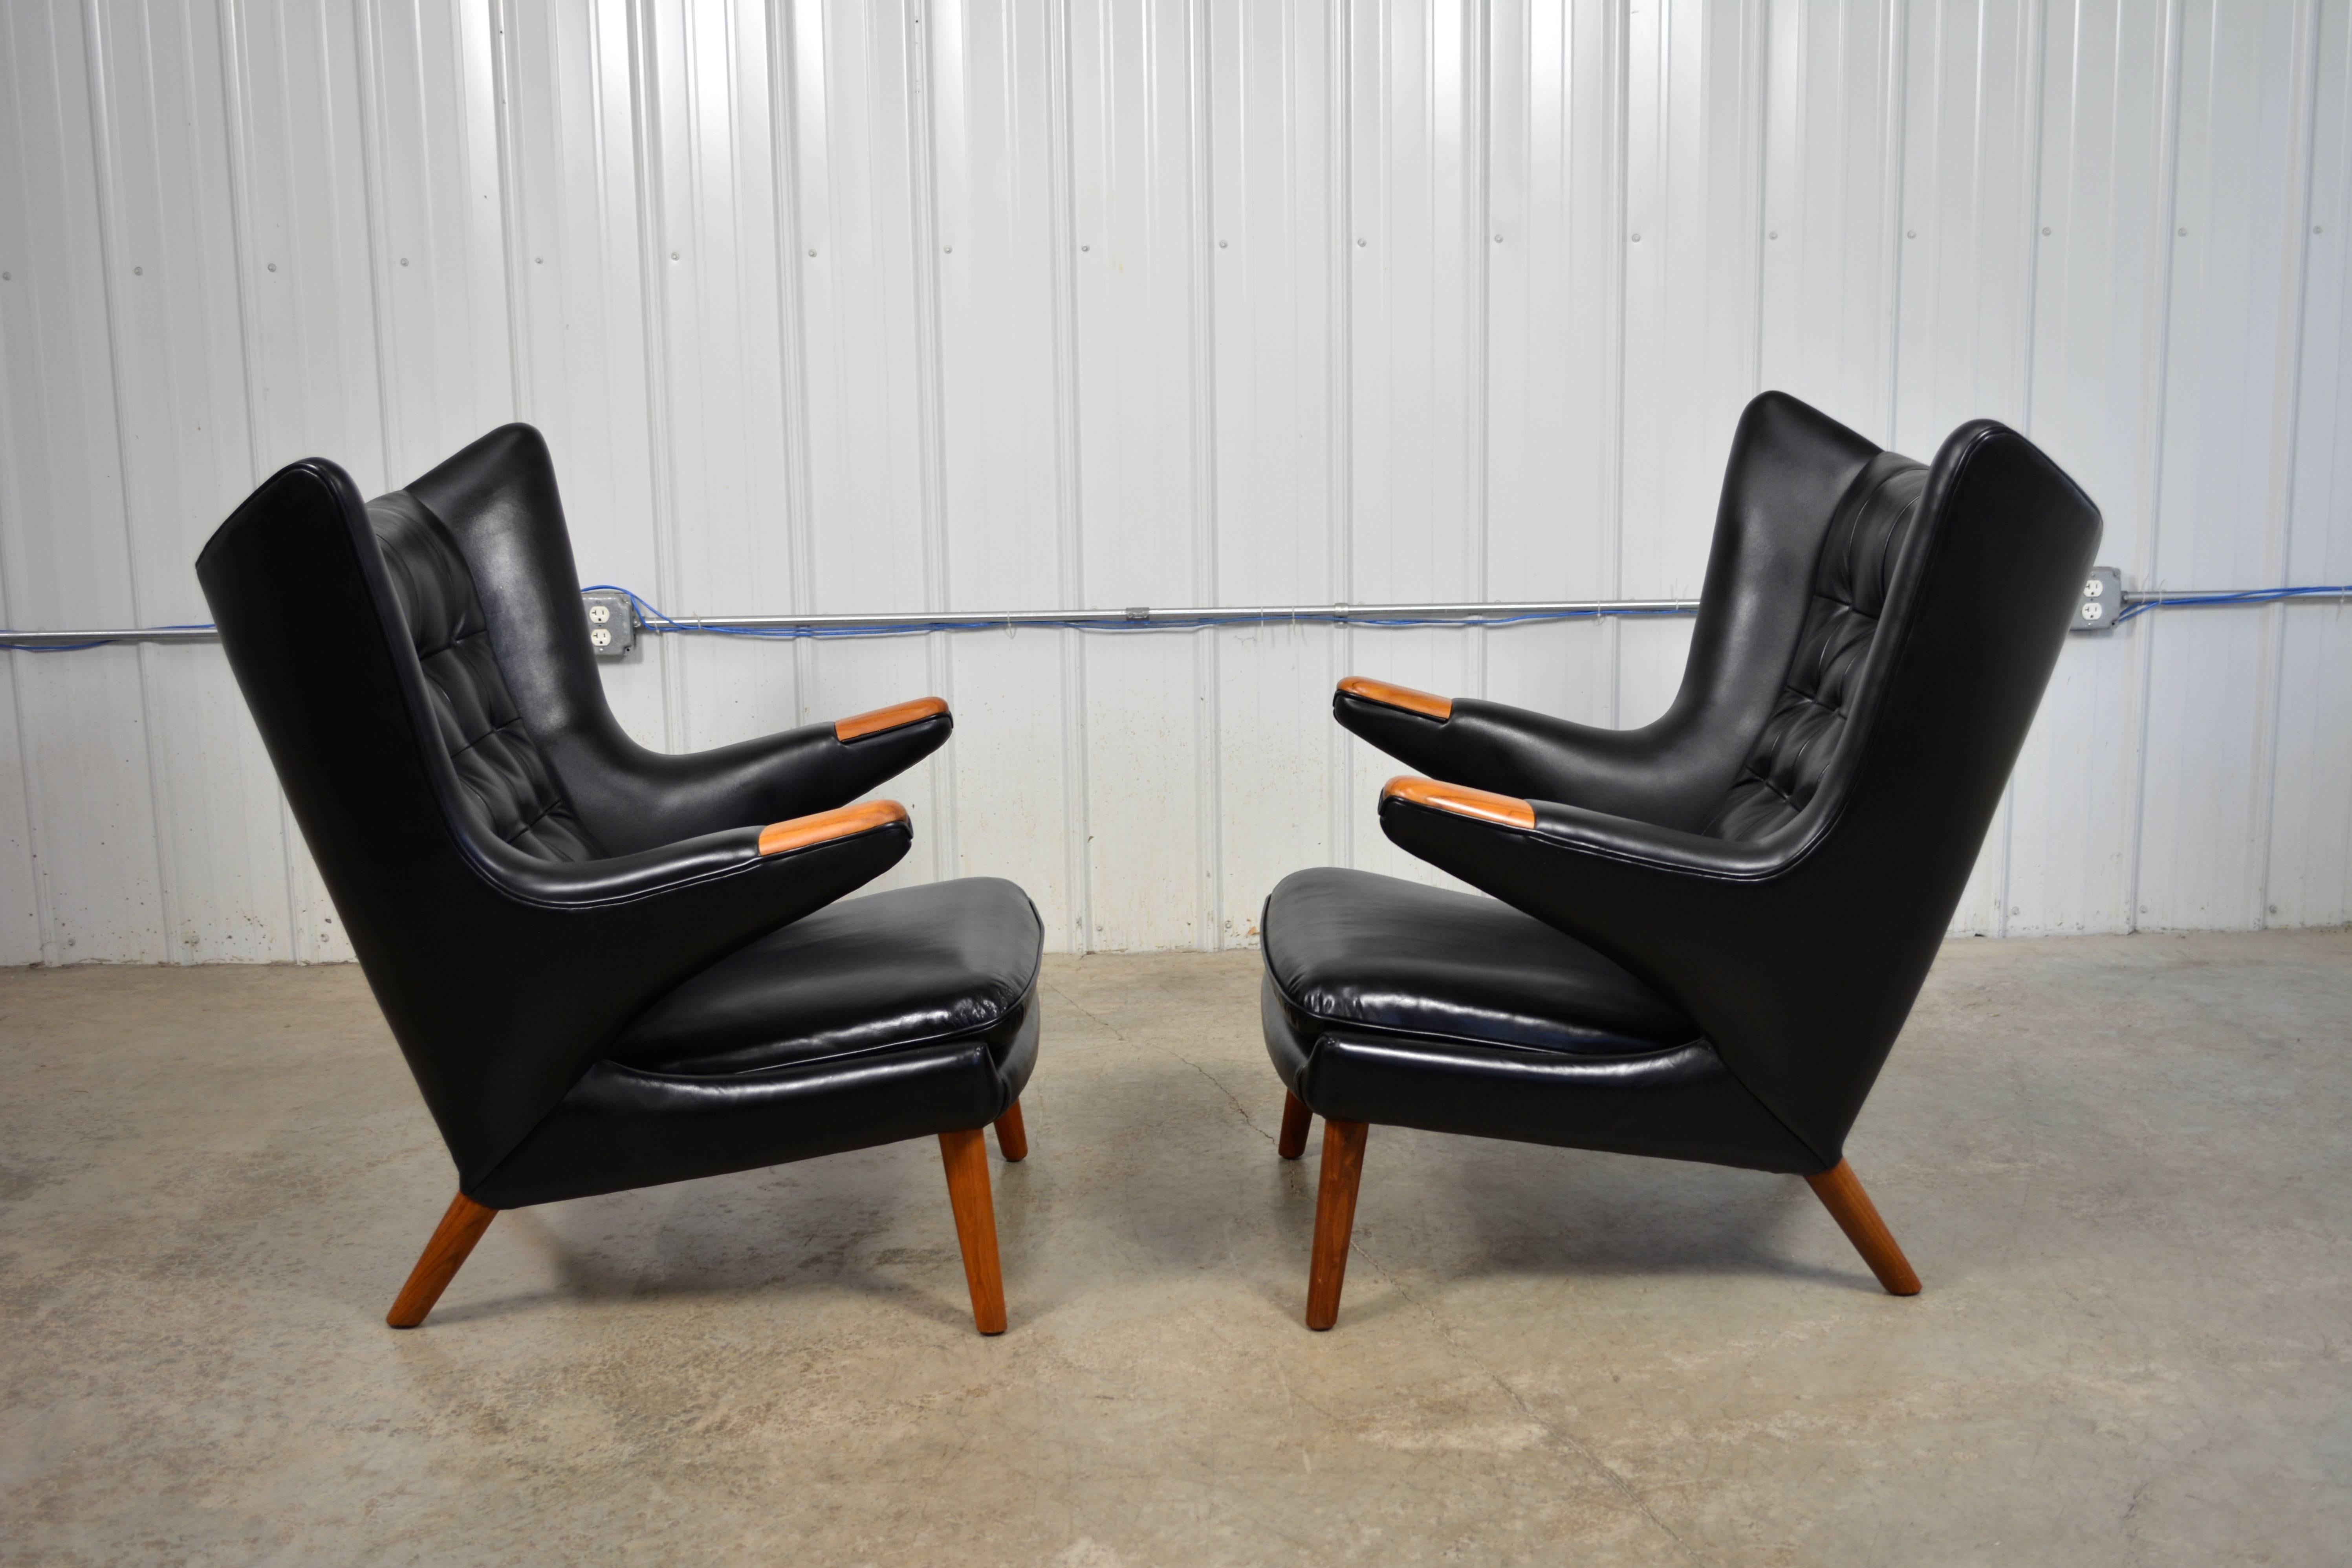 A pair of Hans Wegner "Papa Bear" chairs designed in 1951 for A.P. Stolen. Both chairs are labeled. Black leather upholstery. Teak legs and paws. 